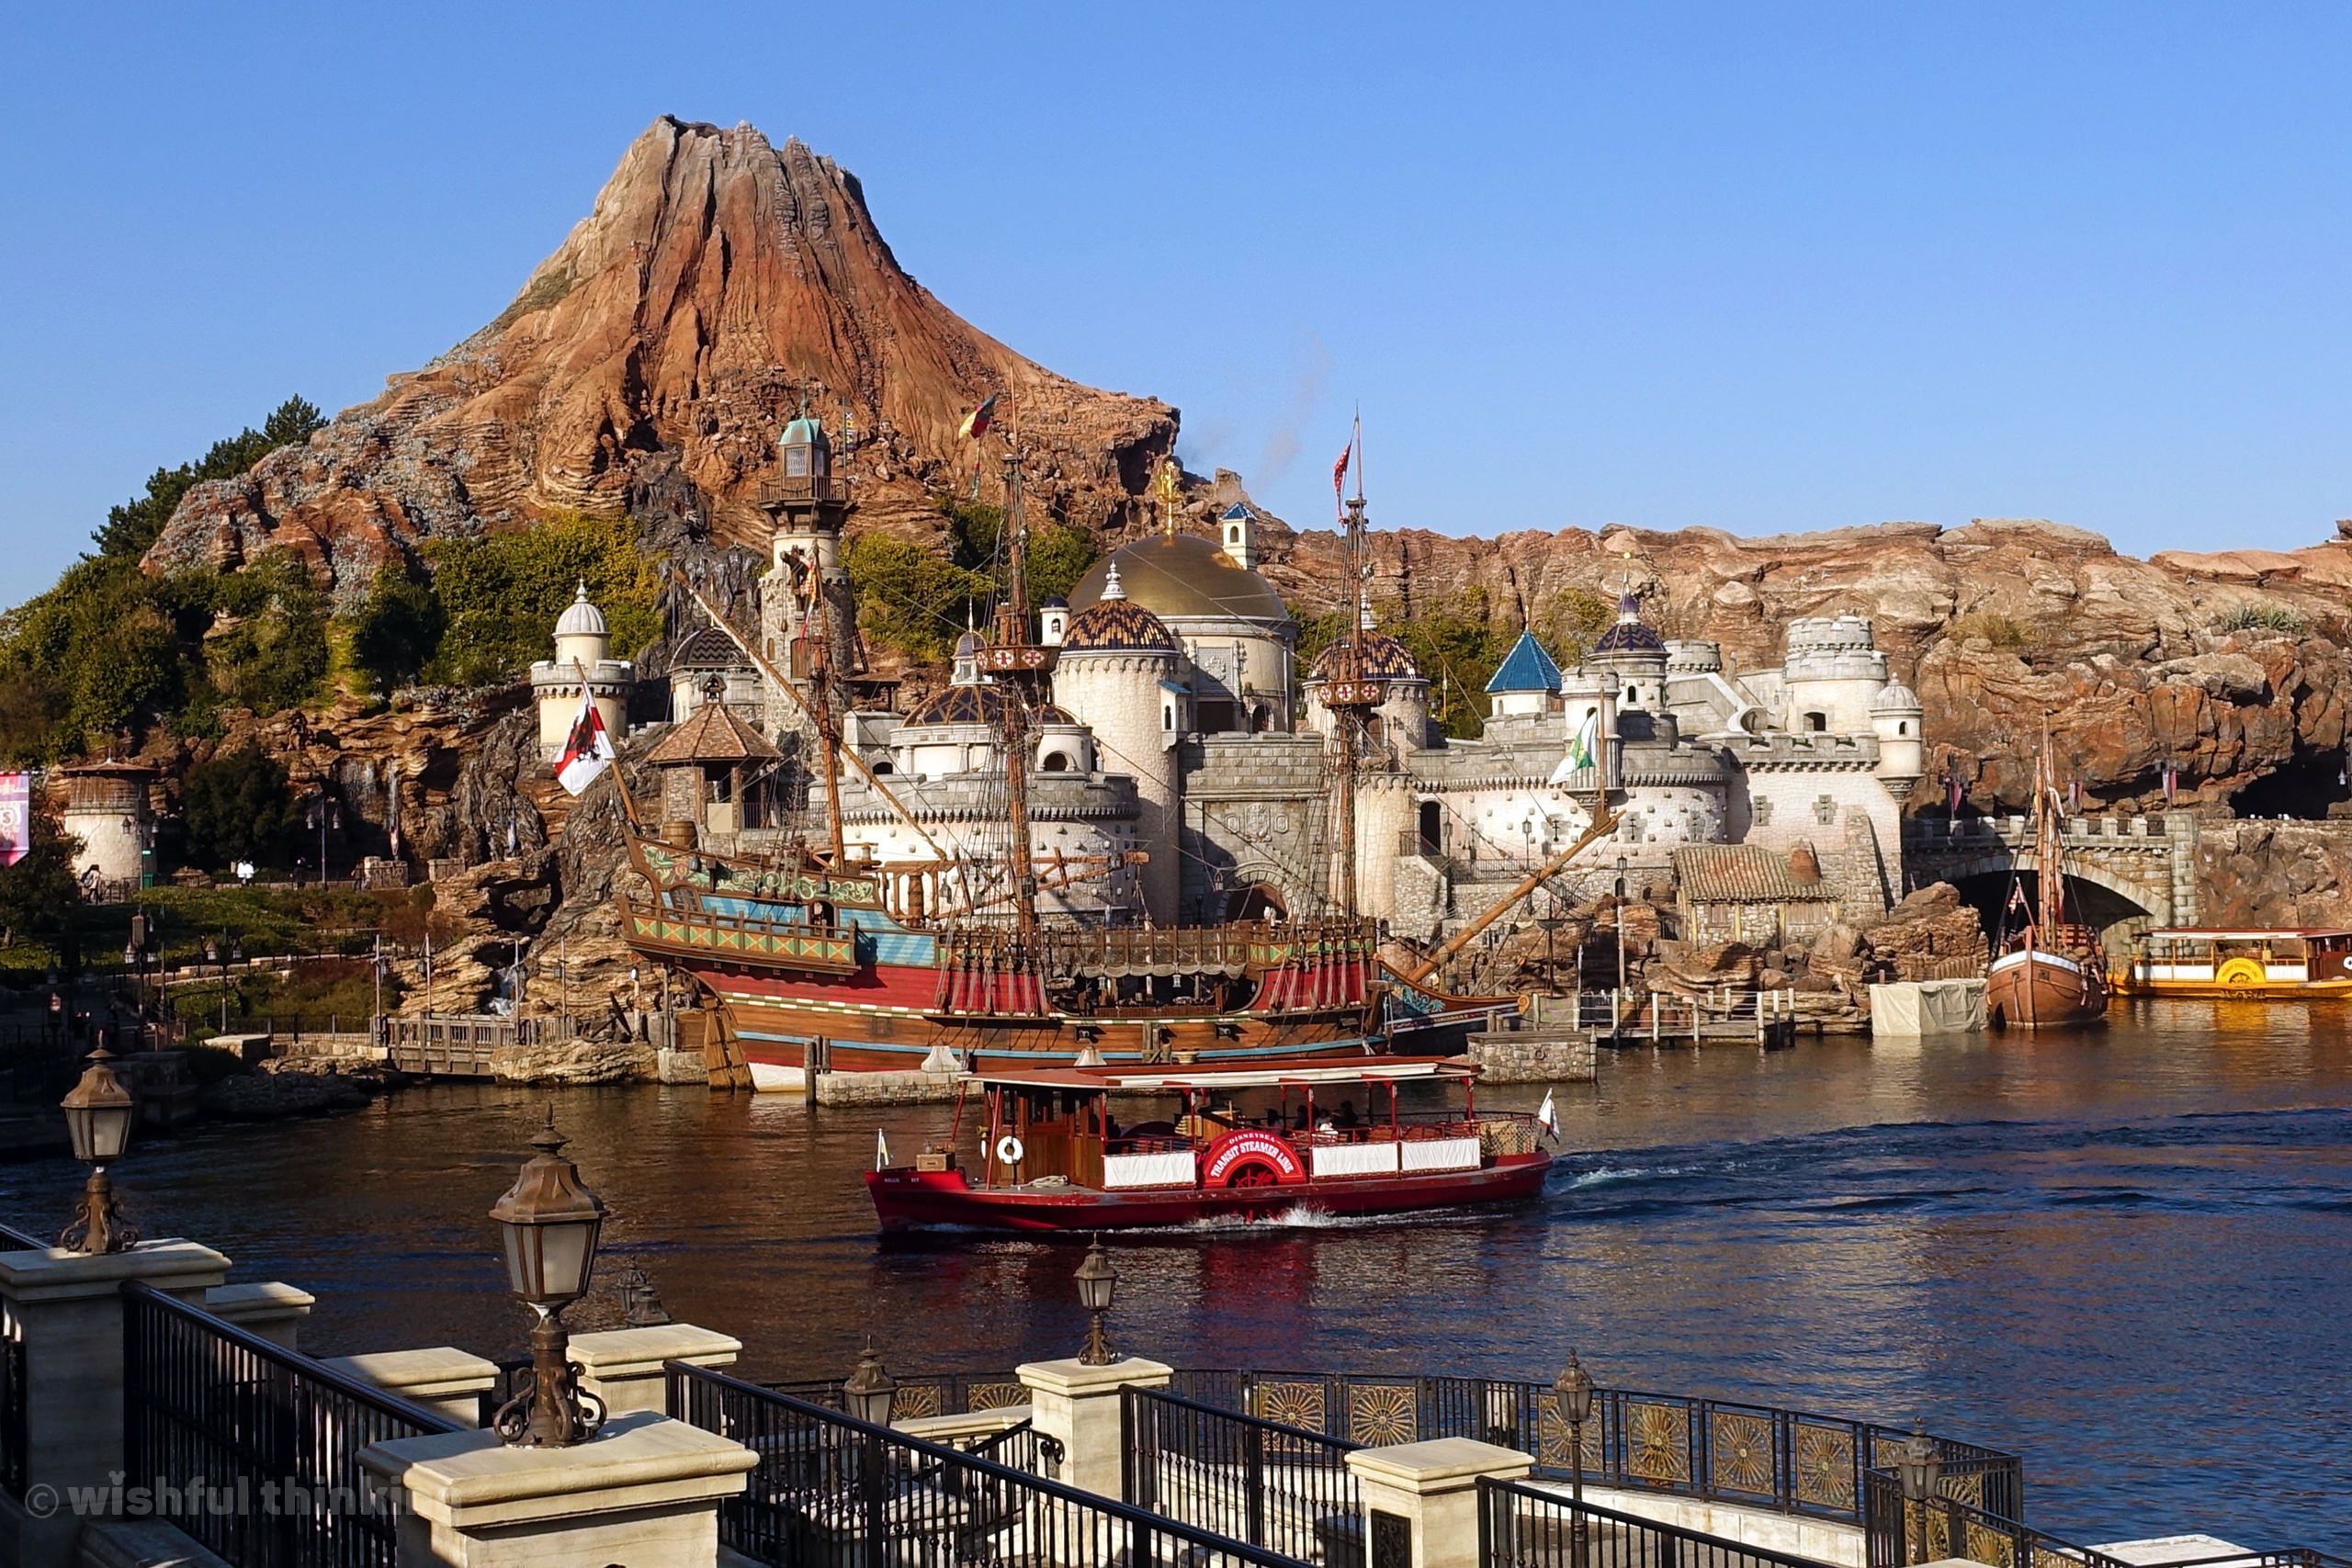 Mount Prometheus at Tokyo DisneySea beckons guests to come explore a sailing ship galleon and the Fortress Explorations within a volcano at Tokyo Disney Resort in Chiba Prefecture, Japan